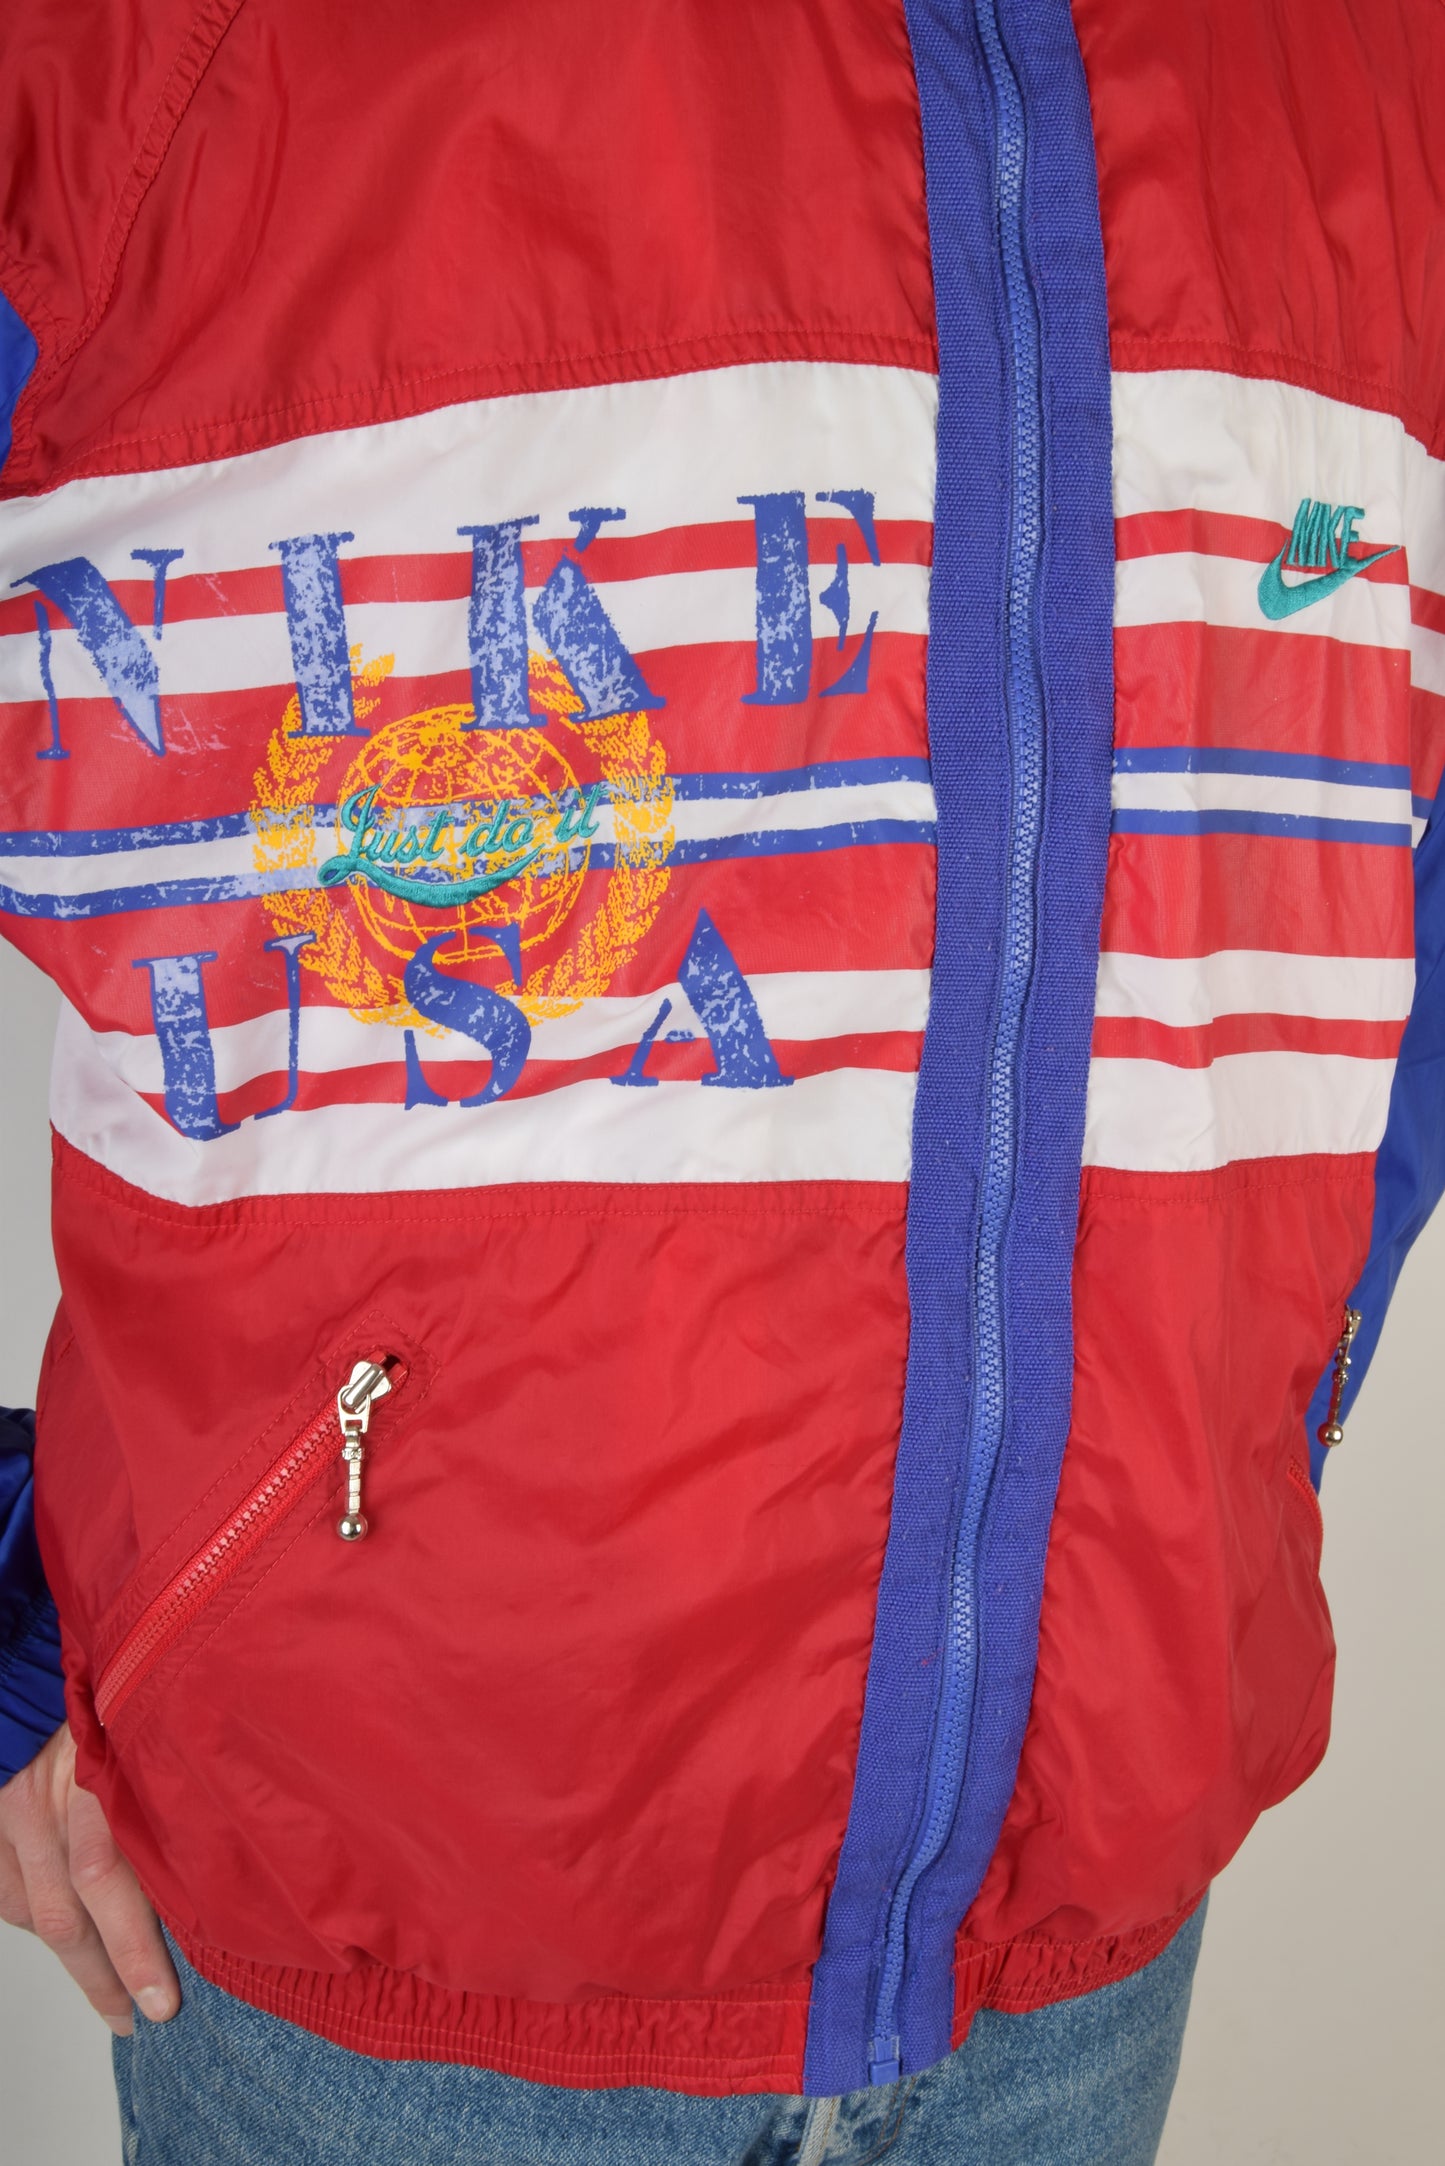 Vintage 90's Nike Jacket / Shell Size L  Red Blue White